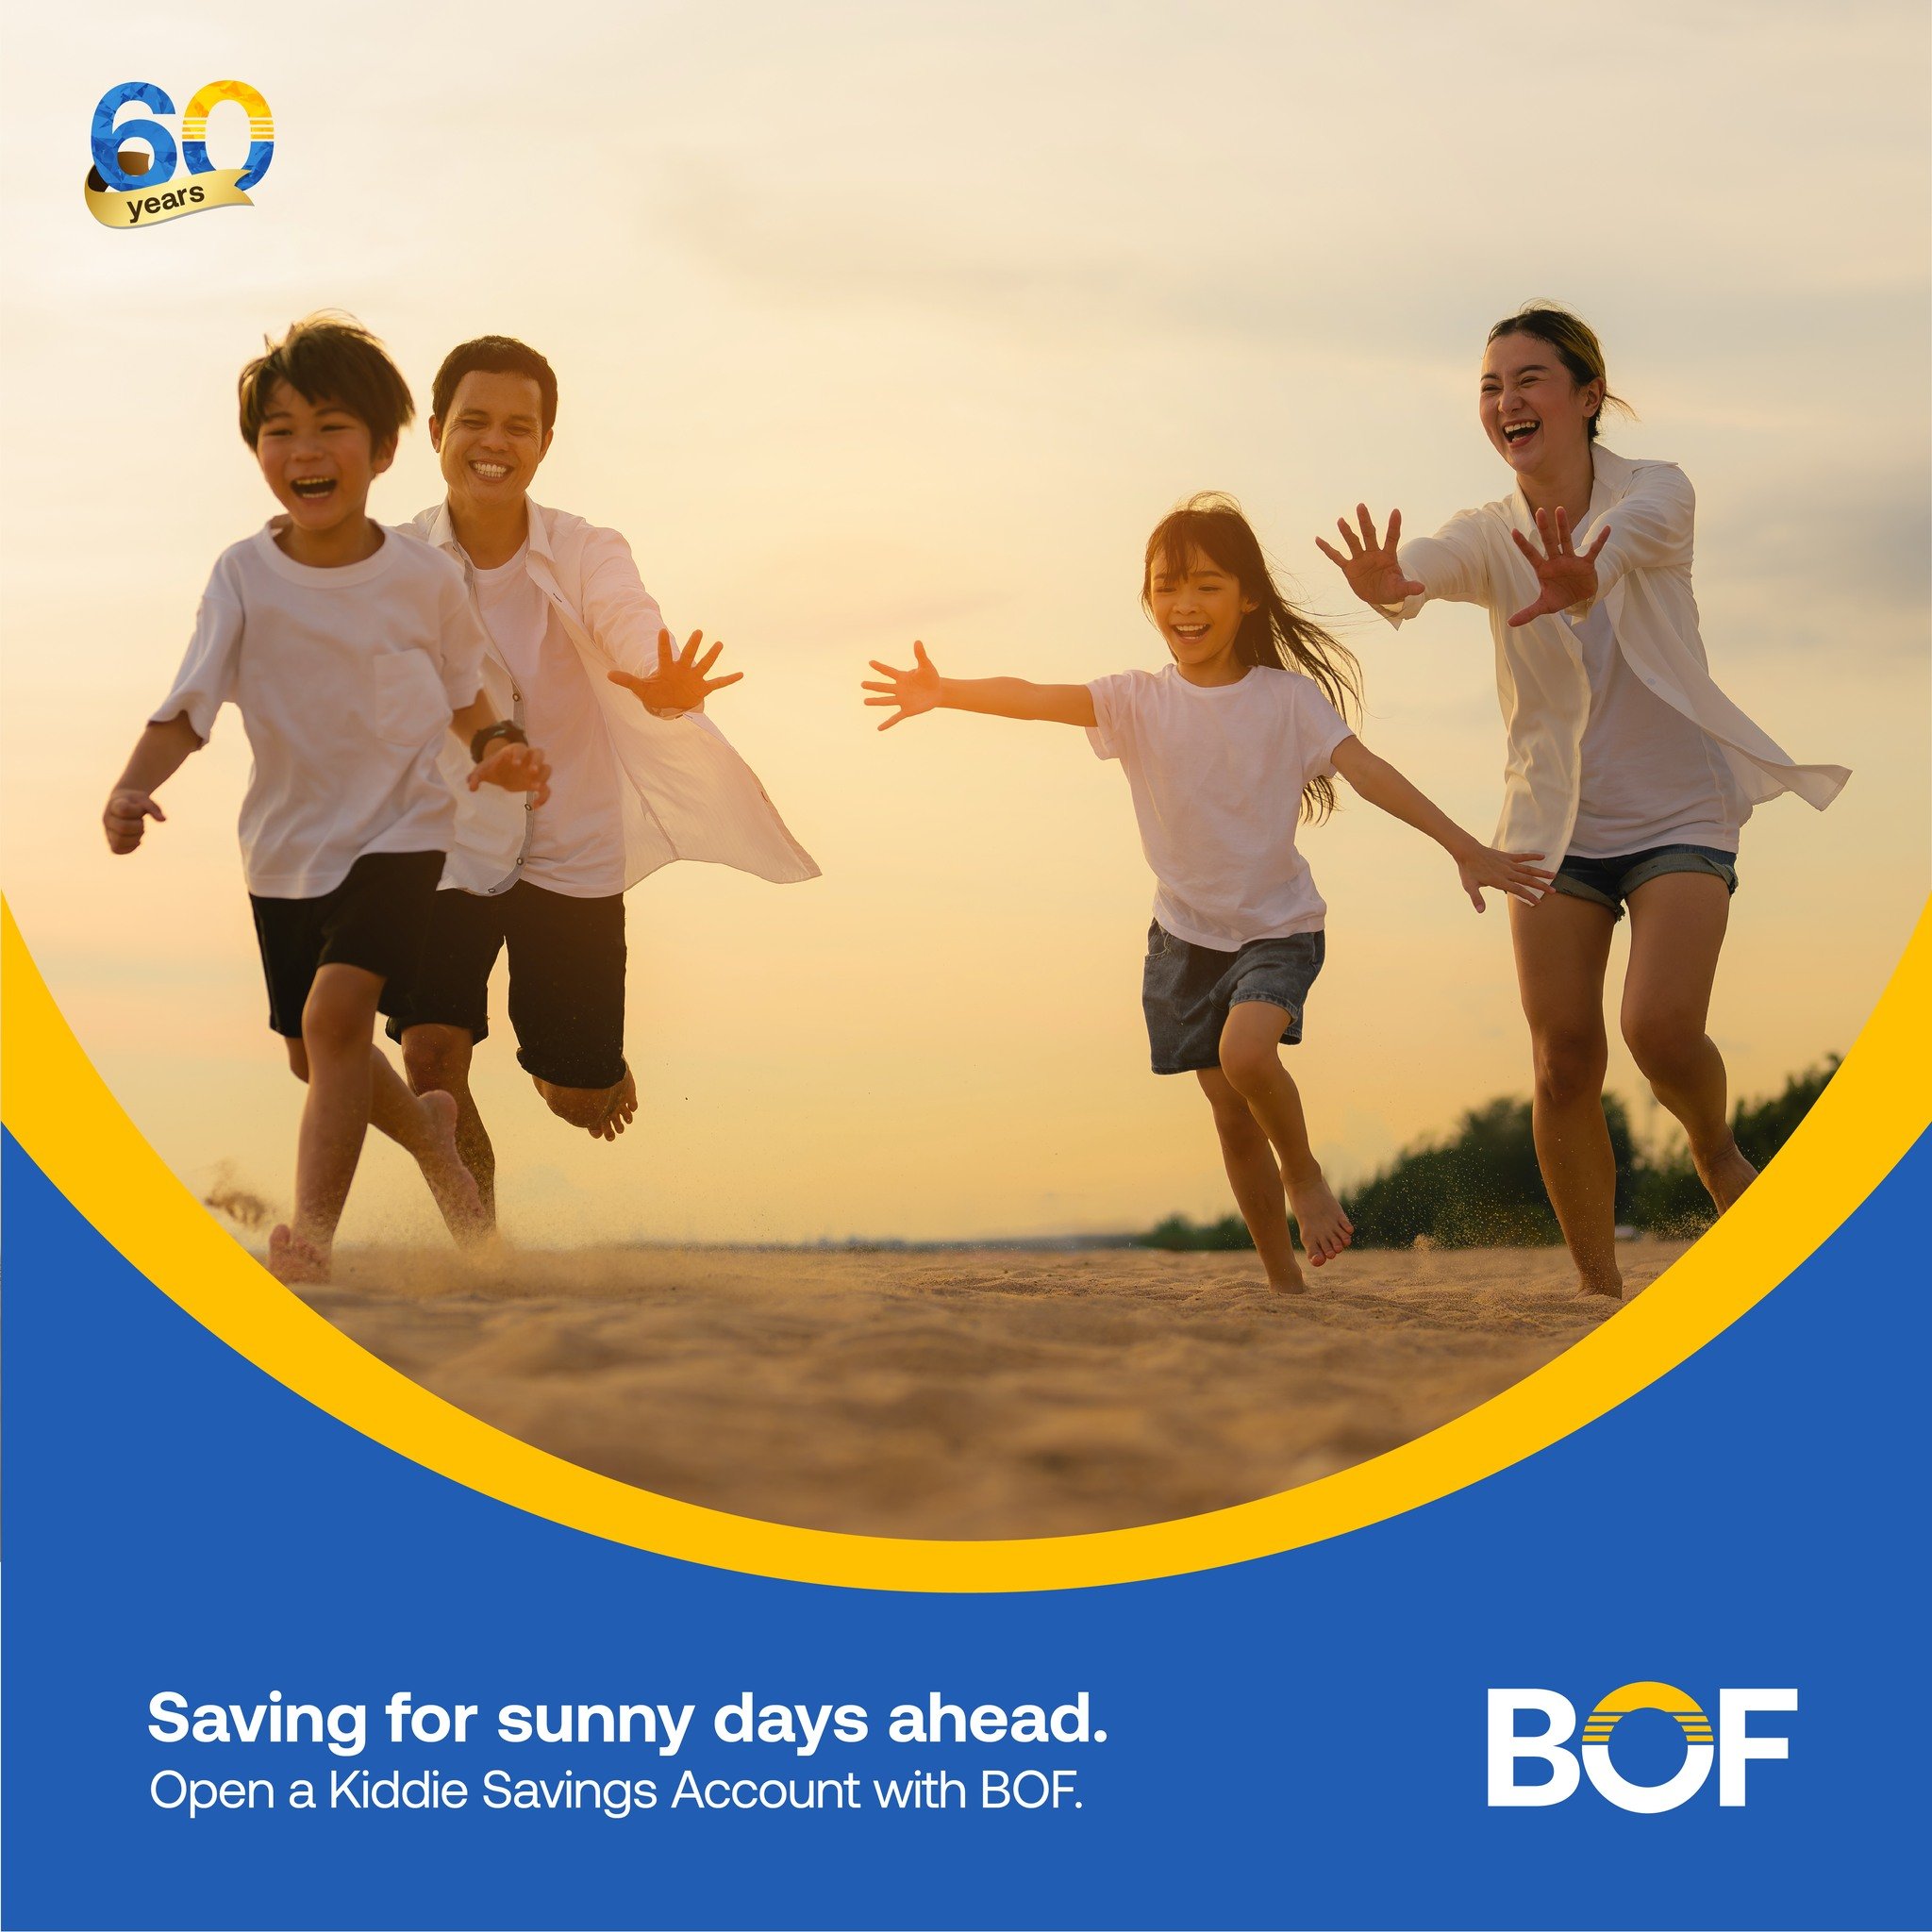 Make your children's future bright. Ask us how!

Visit our website to know more.
 https://www.bof.com.ph/passbook-accounts

#BOF

BOF, Inc. (A Rural Bank) is regulated by the Bangko Sentral ng Pilipinas (www.bsp.gov.ph) and deposits are insured by PD